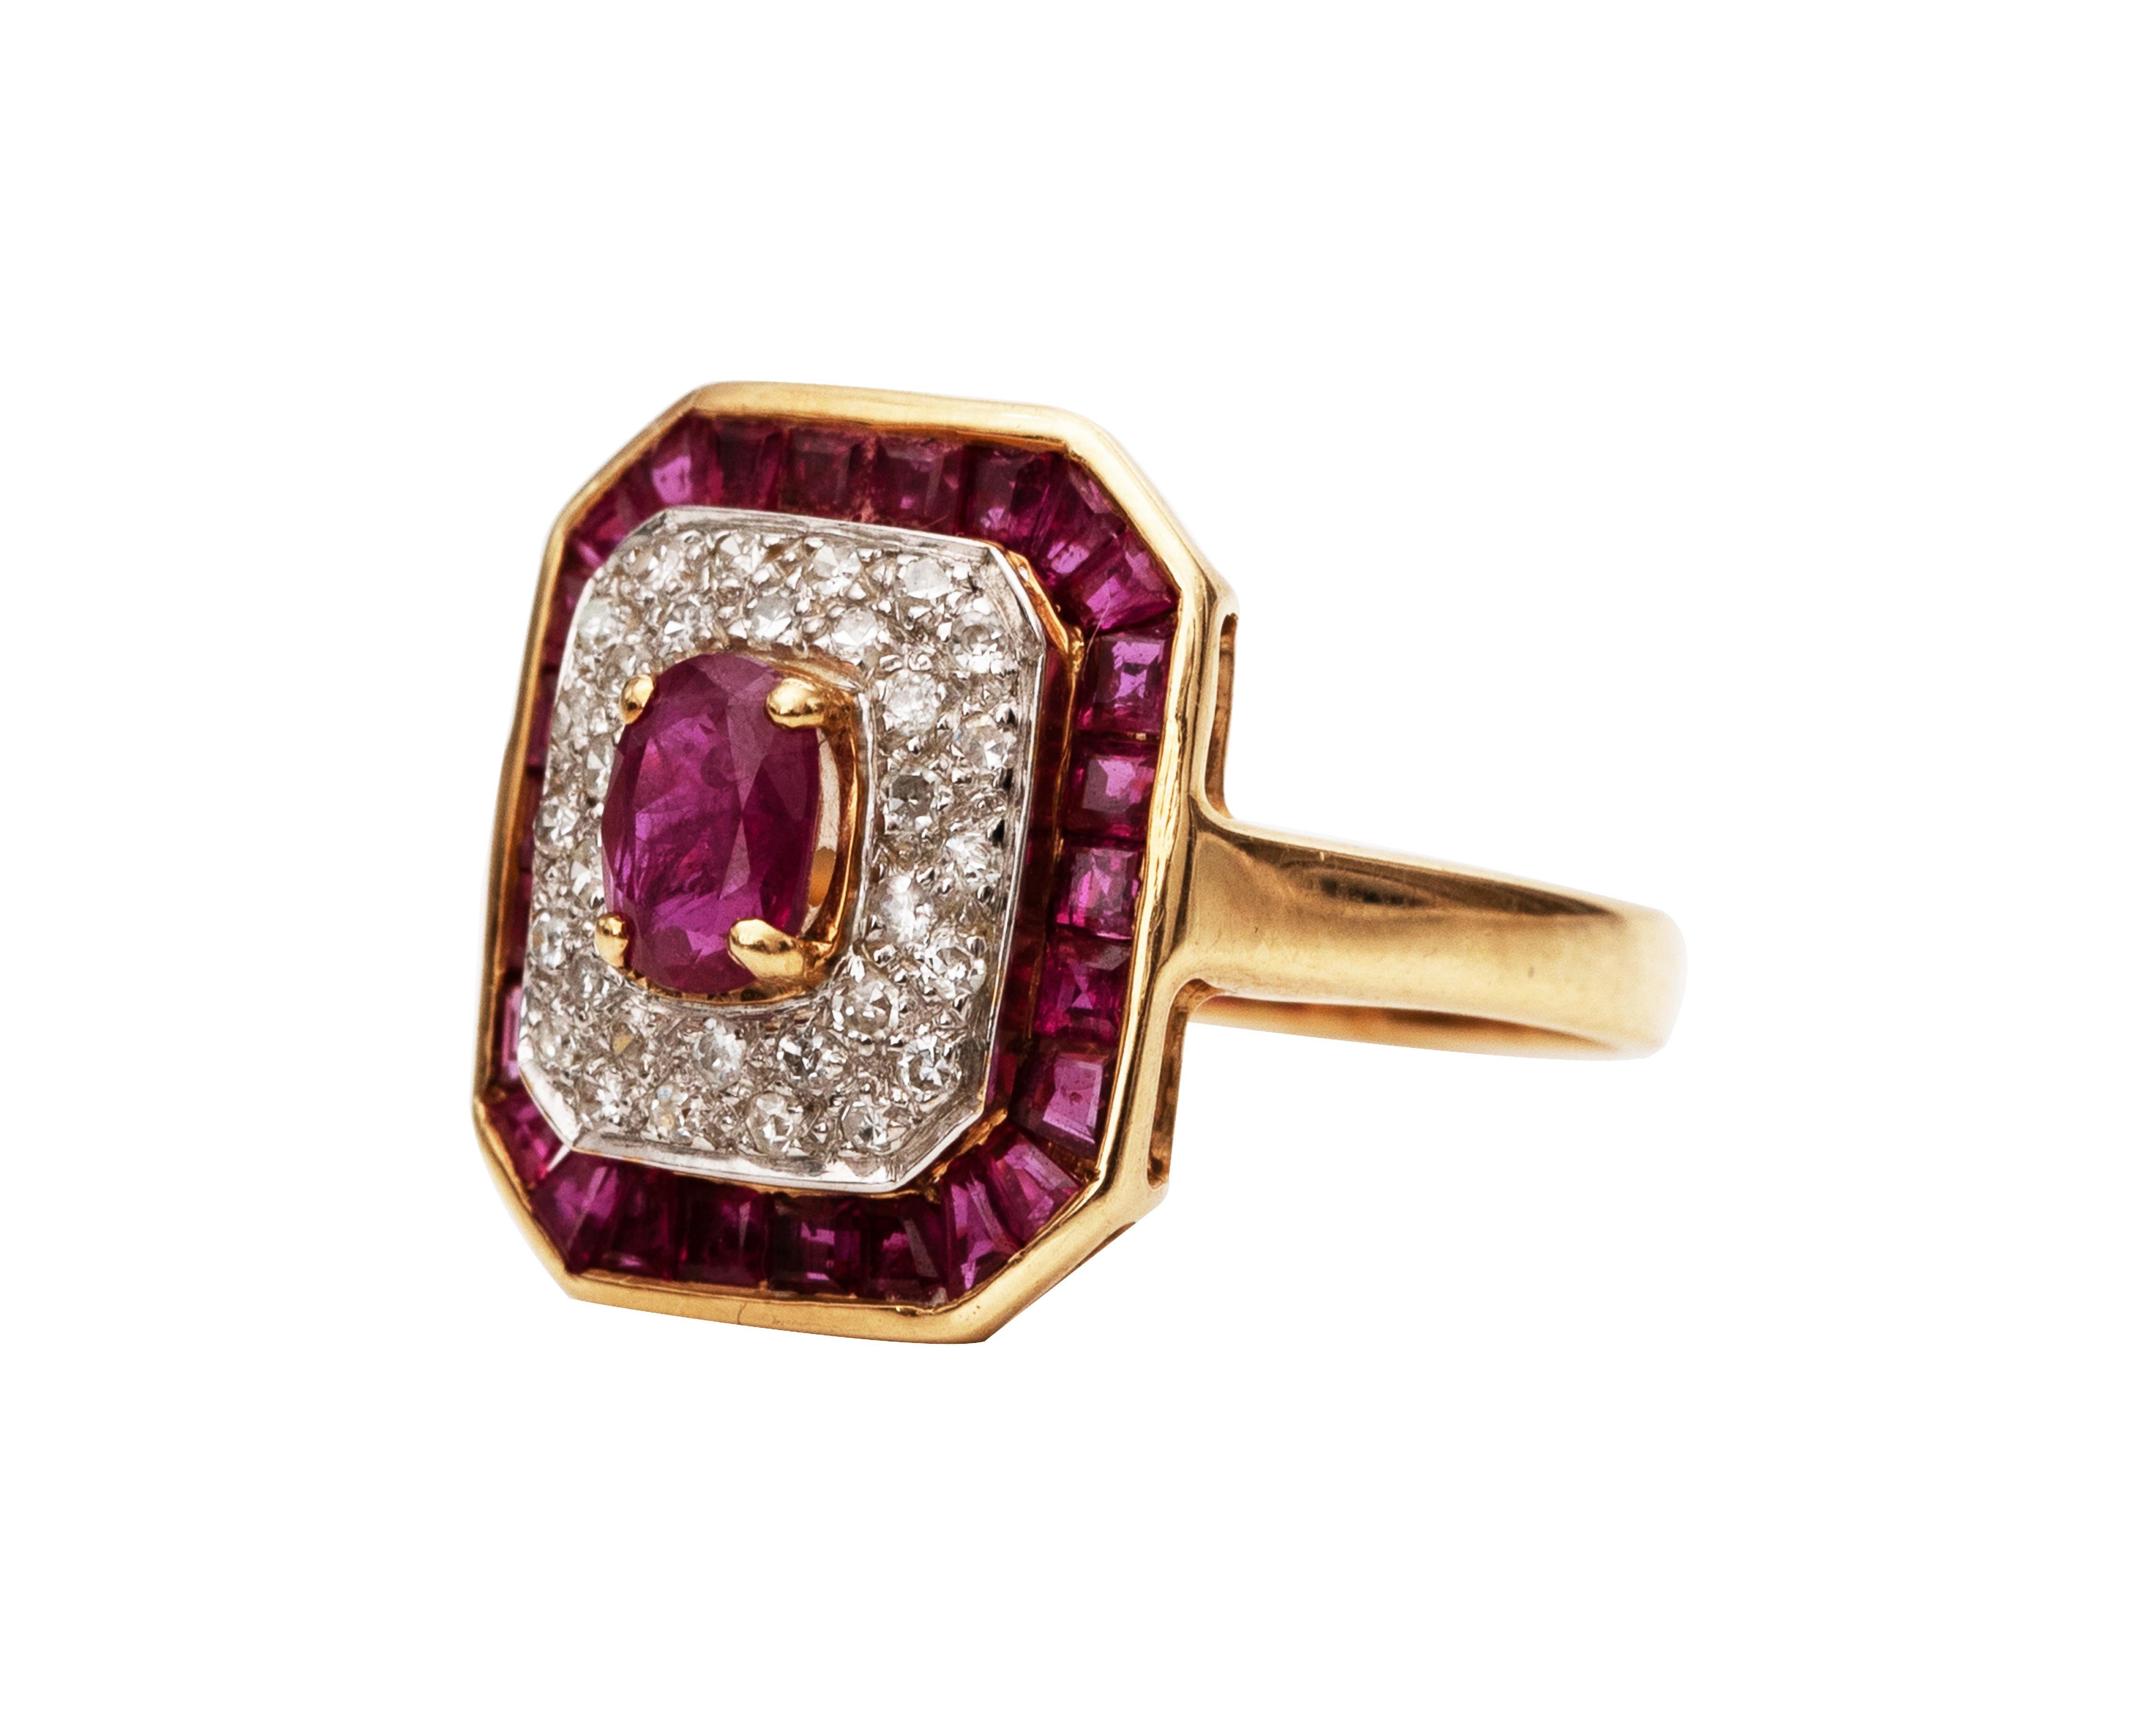 Item Details:
Metal Type: 14 Karat Yellow Gold
Weight: 4 Grams
Size: 6.75 (Resizable)

Diamond Details:
Cut: Round 
Carat: .4 Carat Total Weight
Color: G
Clarity: VS

1 Carat of Rubies
Center Ruby - Oval Cut, Prong-Set
Halo of Rubies - Baguette Cut